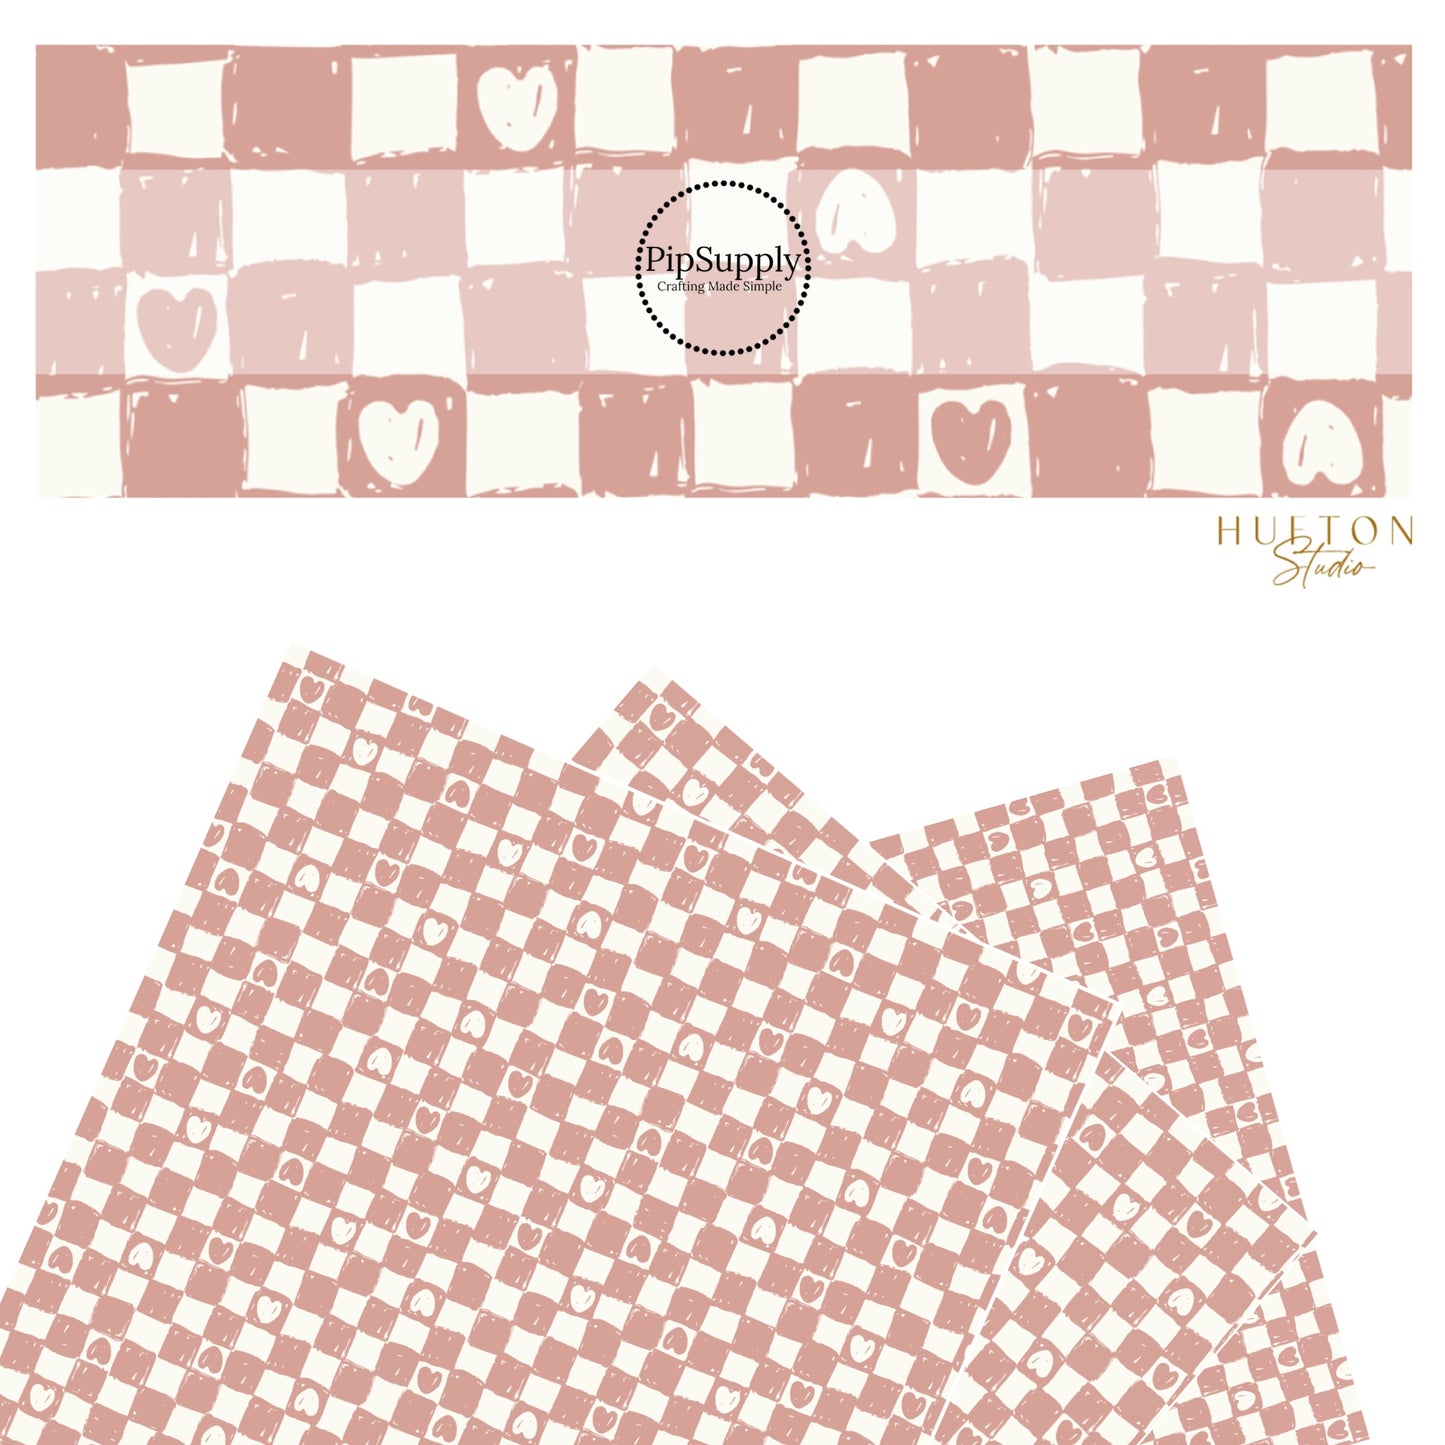 These checkered pattern themed faux leather sheets contain the following design elements: dusty rose and cream checkered pattern with tiny hearts. Our CPSIA compliant faux leather sheets or rolls can be used for all types of crafting projects.